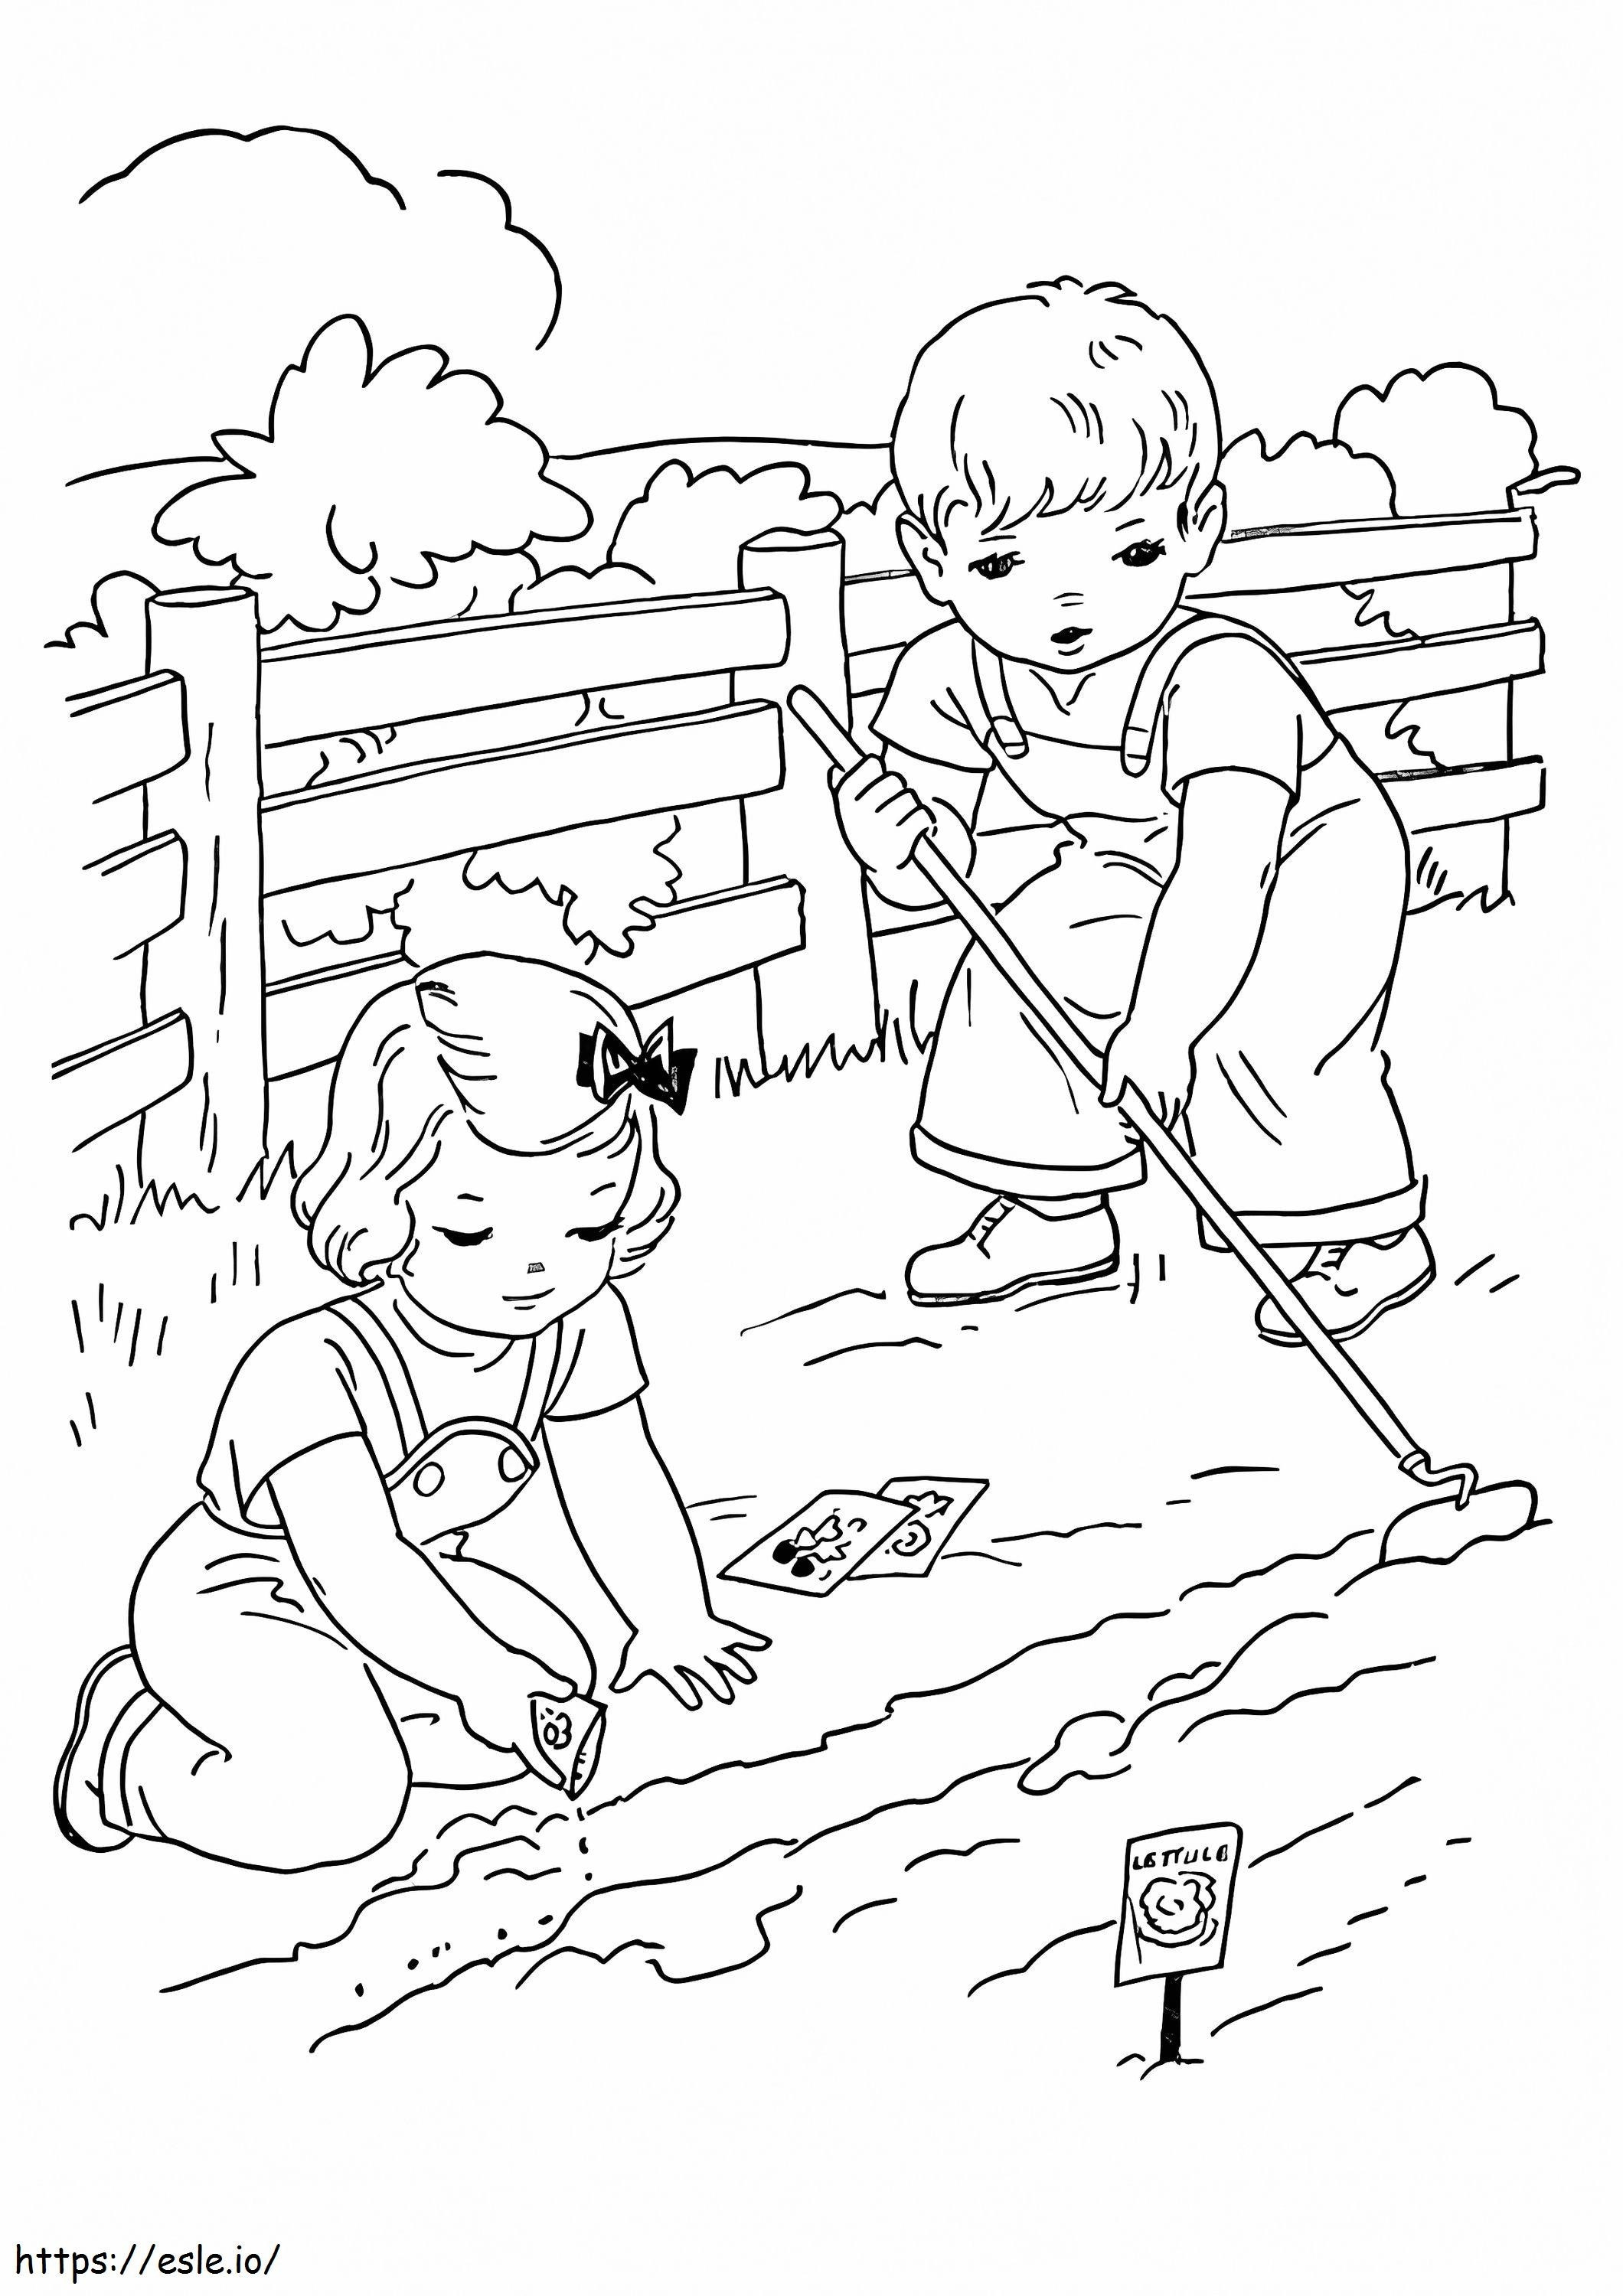 Two Children Farming coloring page